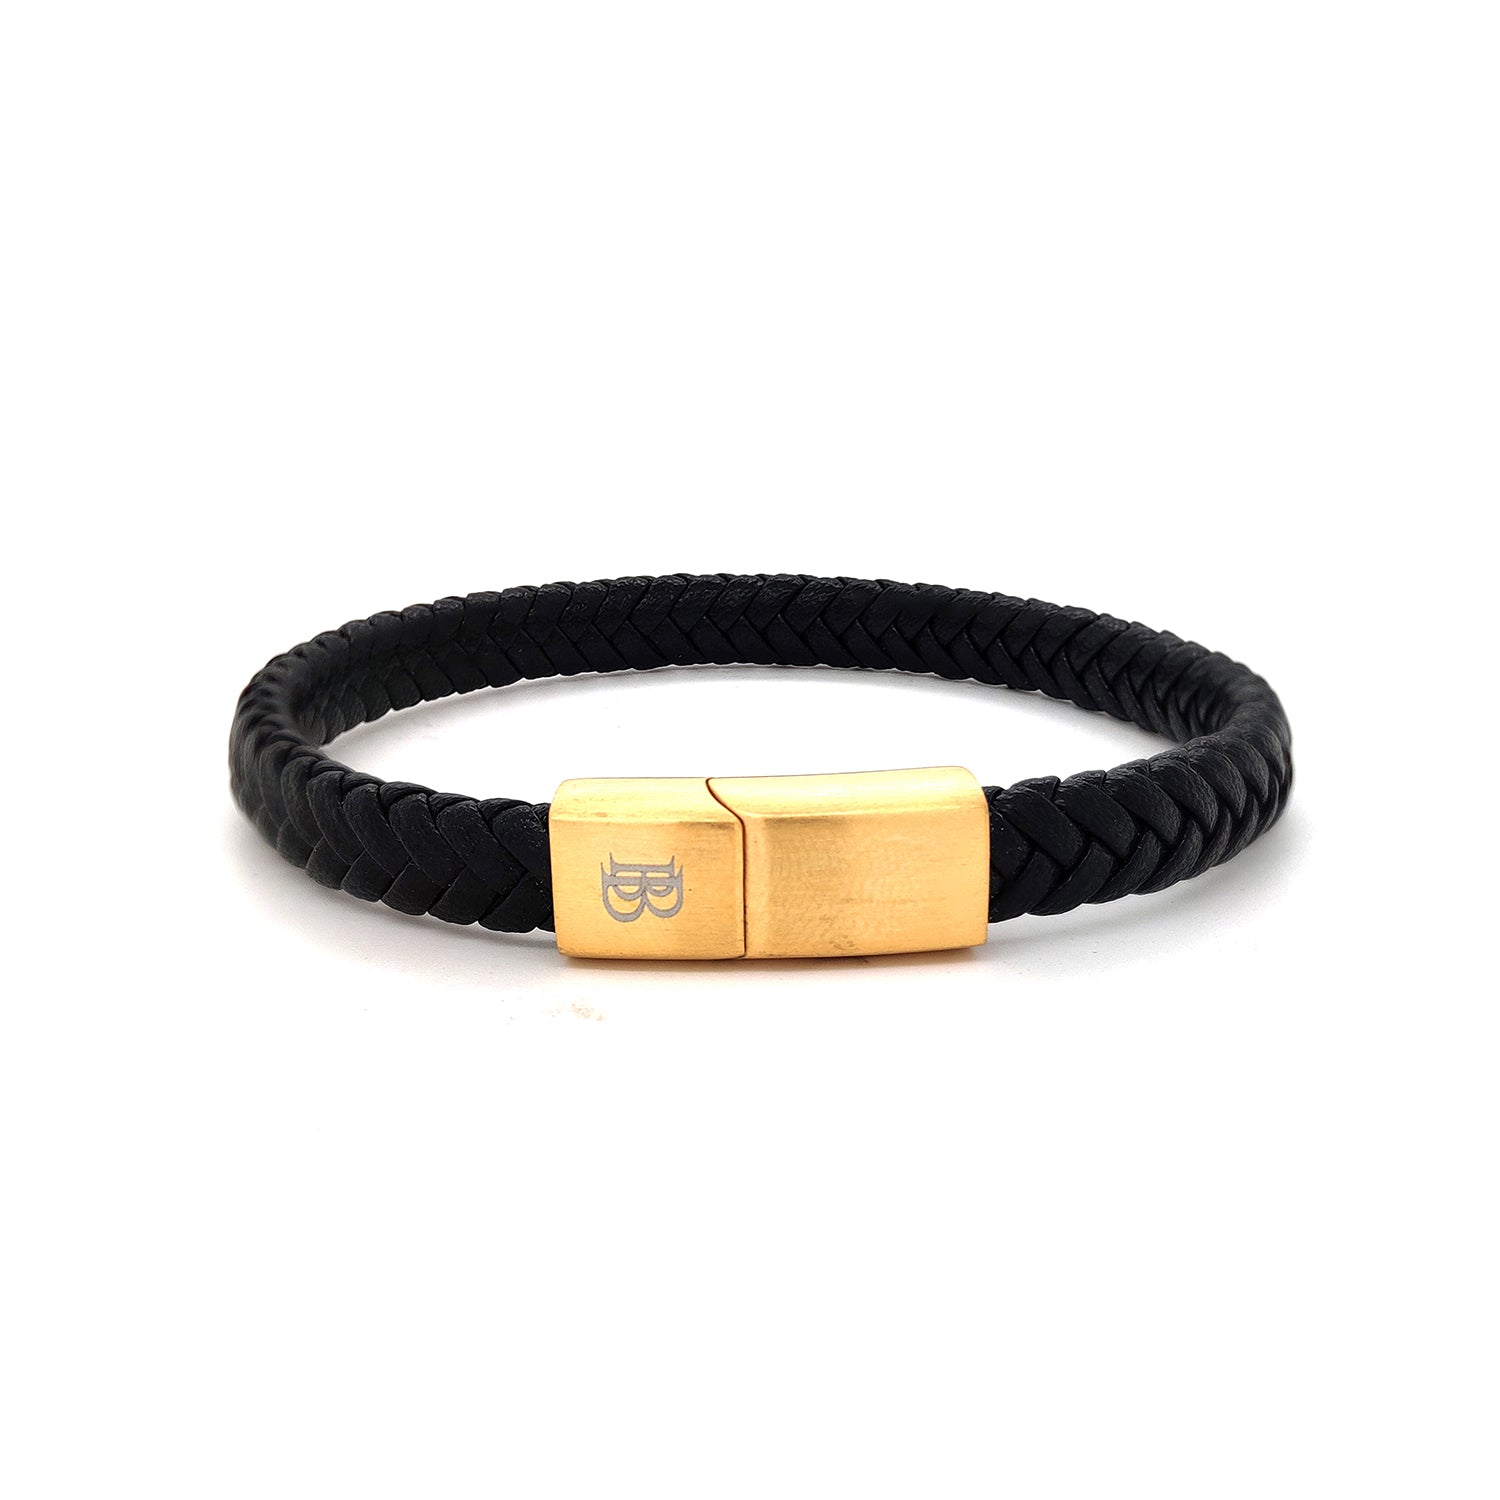 Black Flat Leather Bracelet With Brushed Stainless Steel Lock